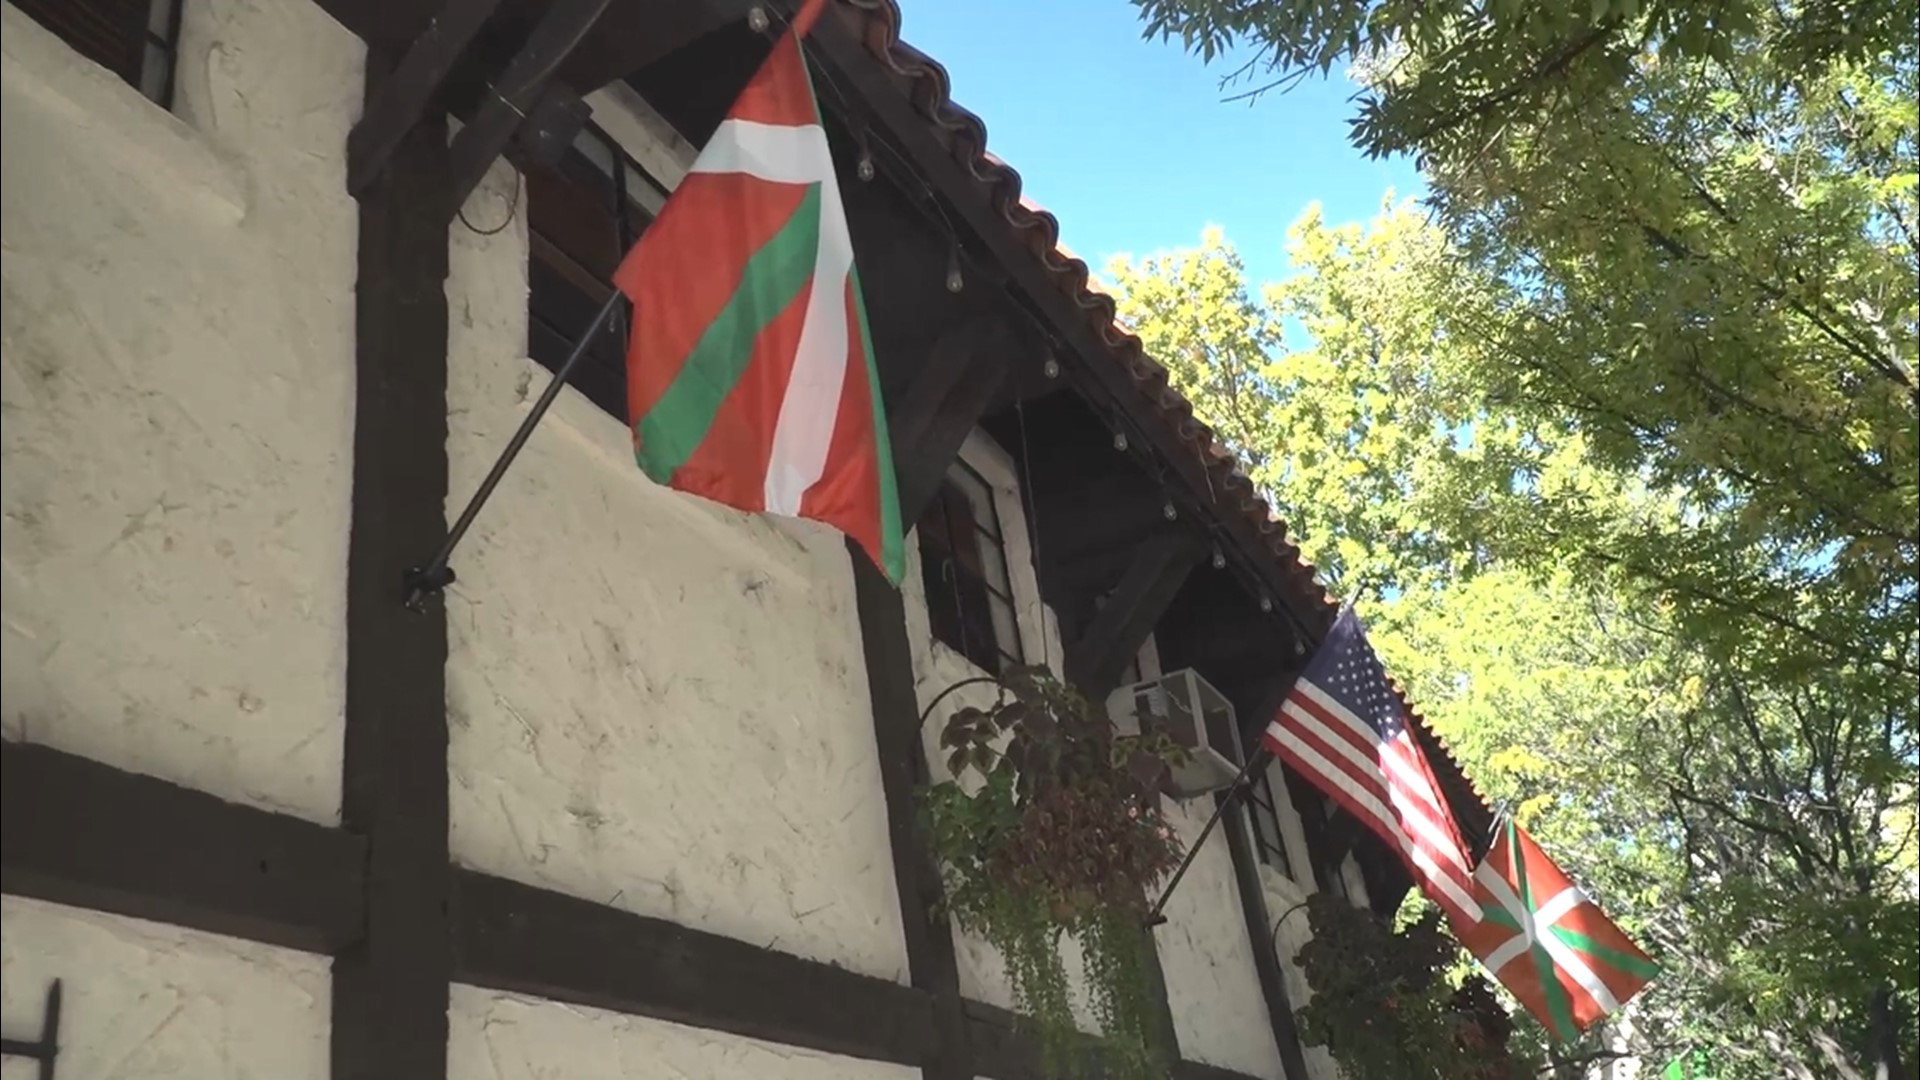 Learn about the Basque block and how much history it brings to Boise.